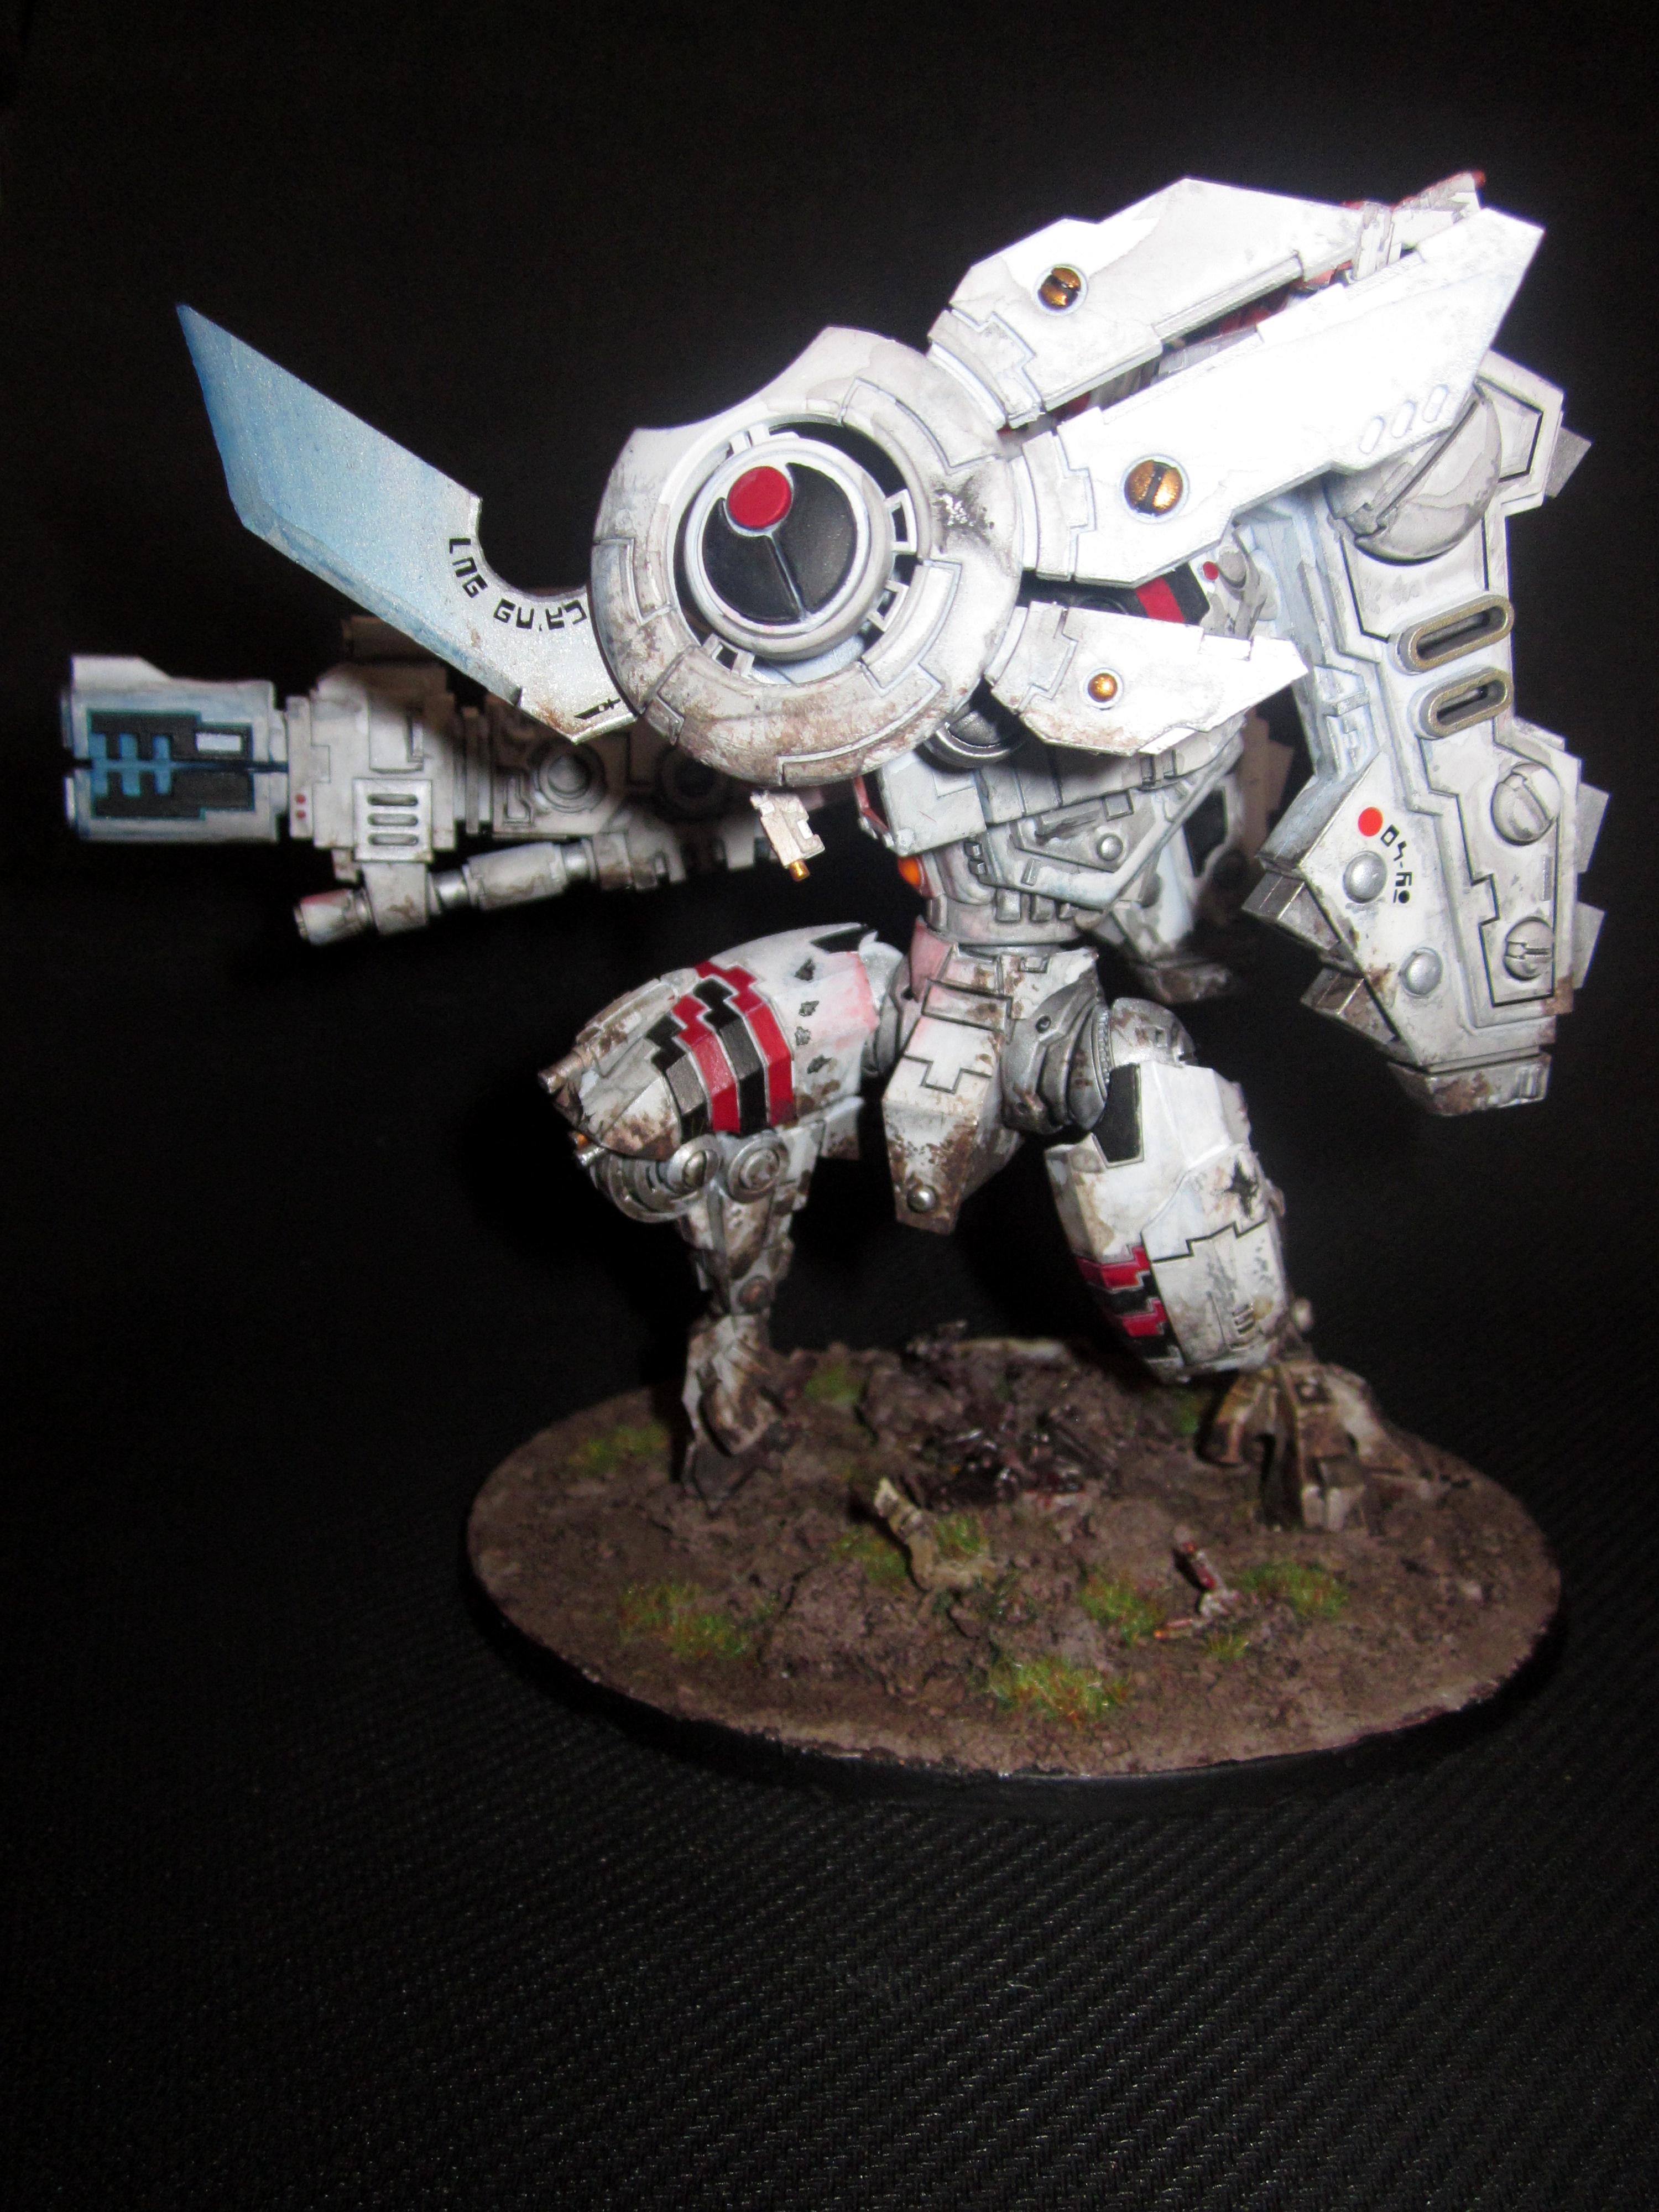 Black, Ion, Mud, Object Source Lighting, Red, Riptide, Tau, Weathered, White